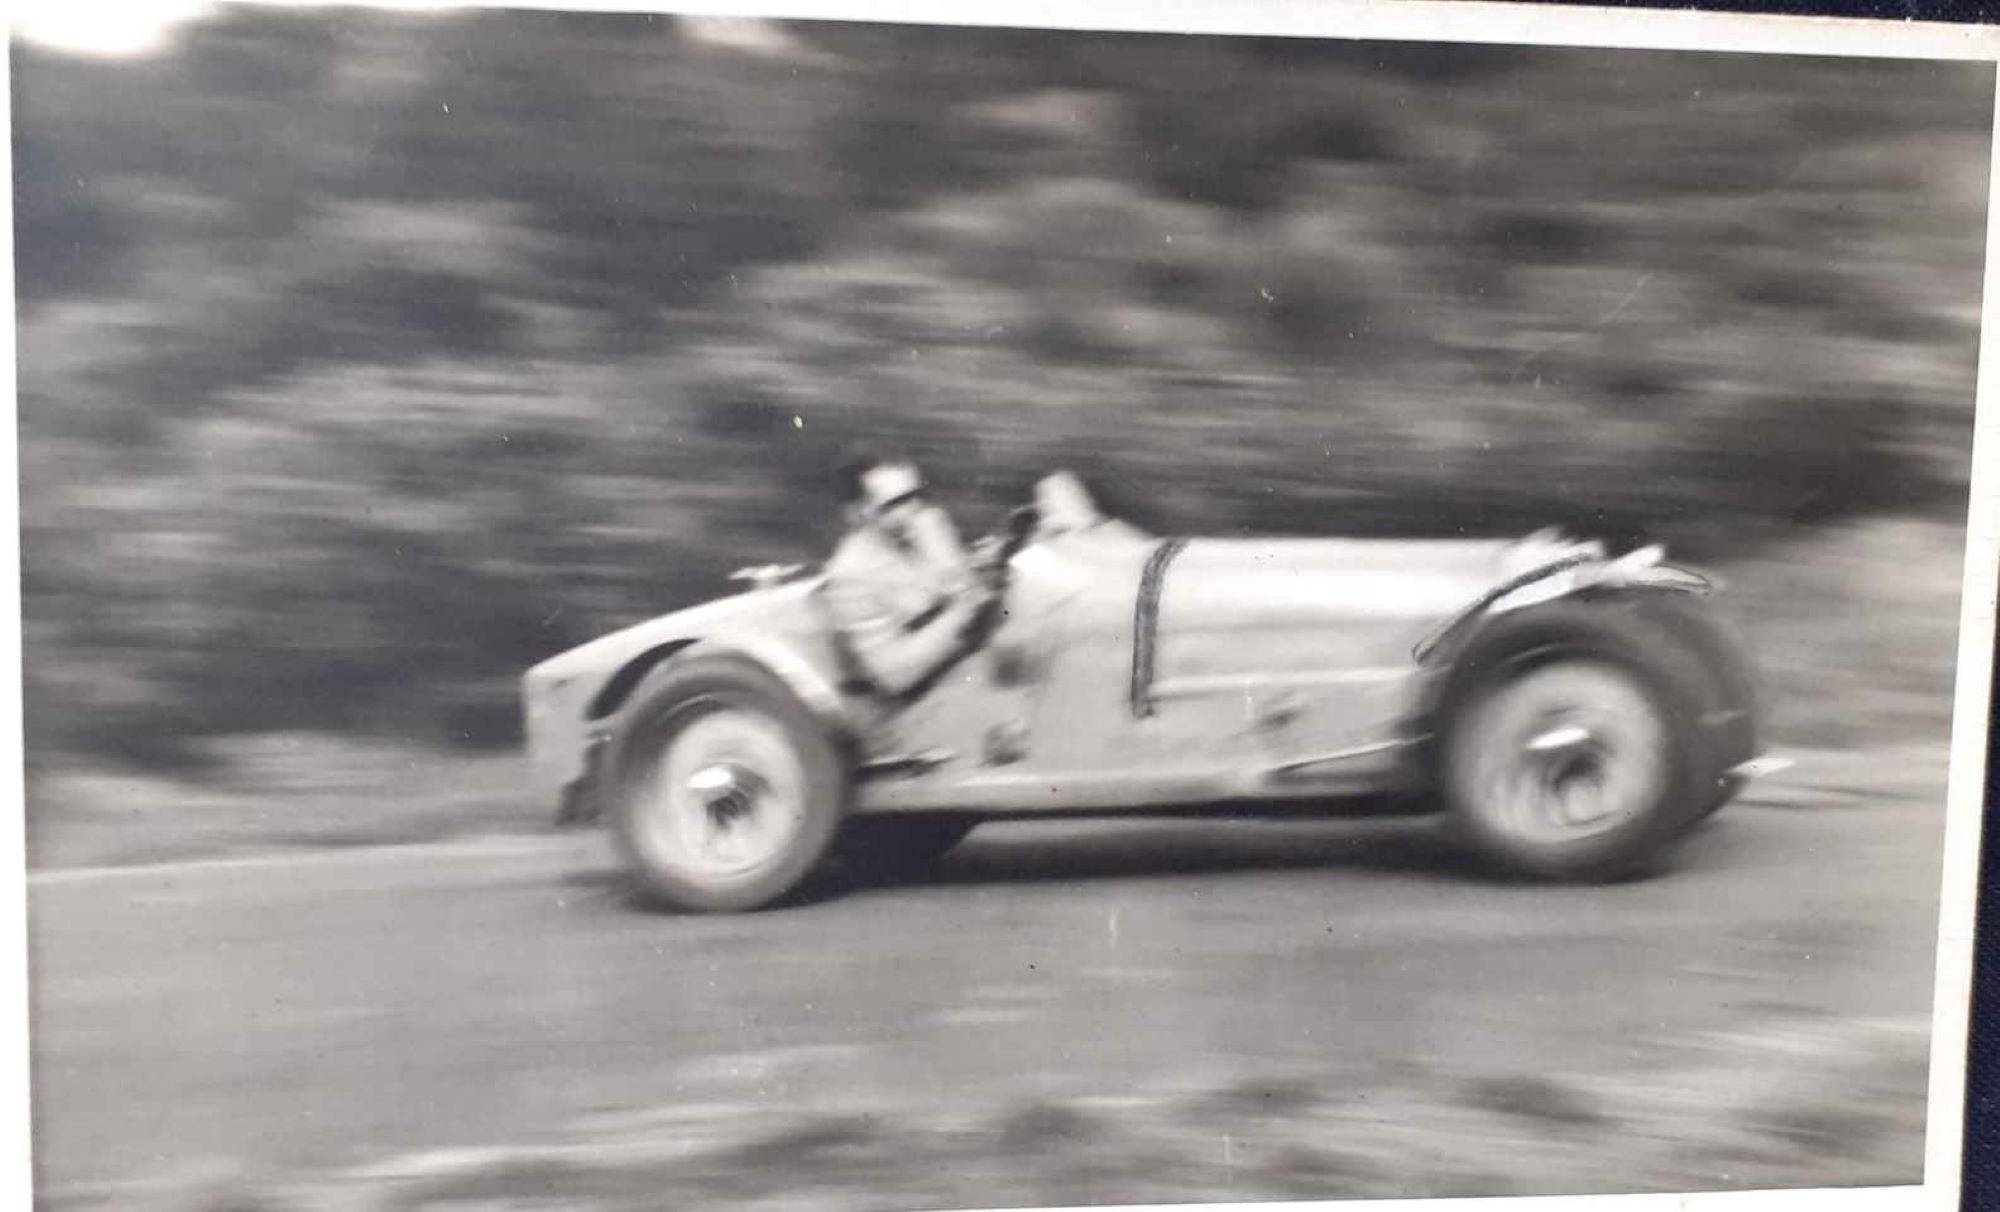 Name:  NSCC 1950 #0116 Bugatti T35 at speed - light colour 1950's - image Graeme Wells arch Anthony Wel.jpg
Views: 196
Size:  158.1 KB